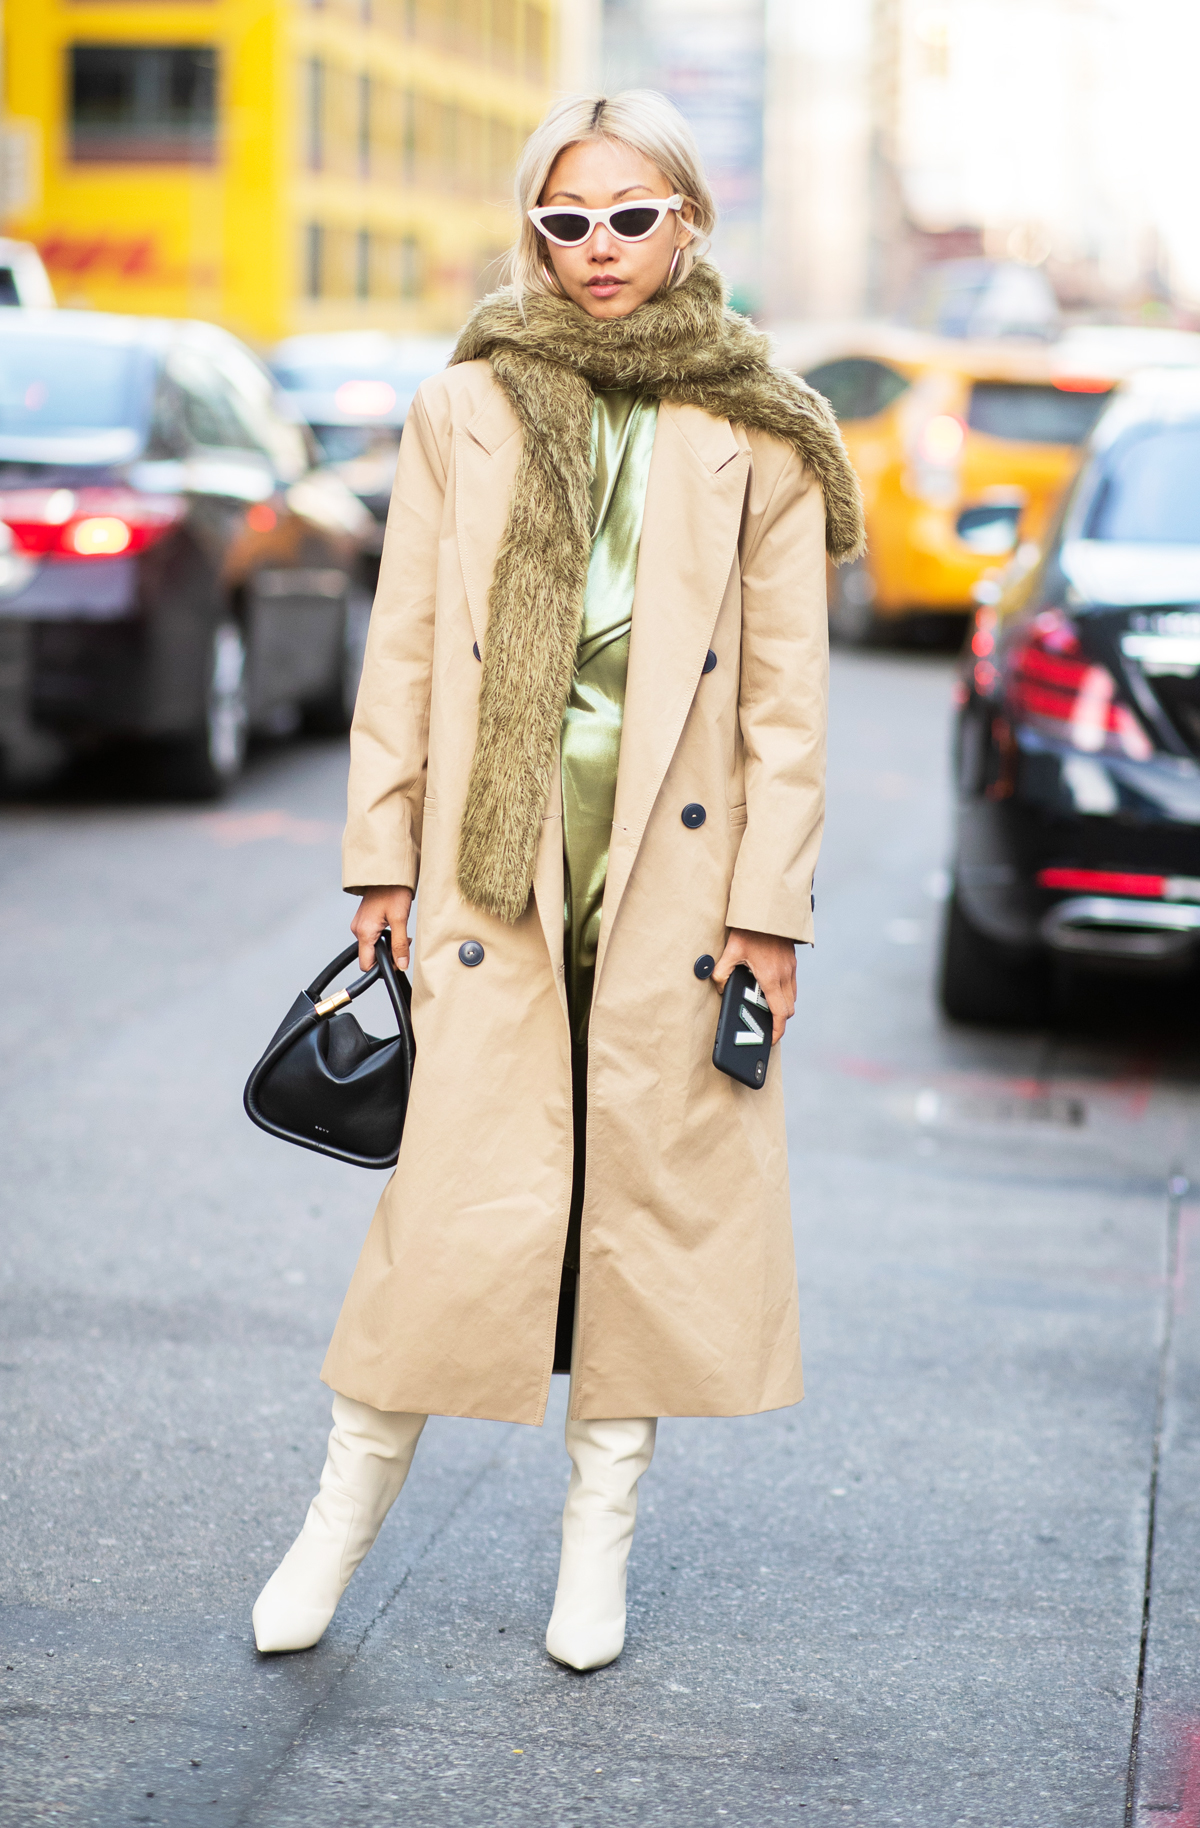 Wear A Trench Coat When It S Cold, Can Trench Coat Be Worn In Winter